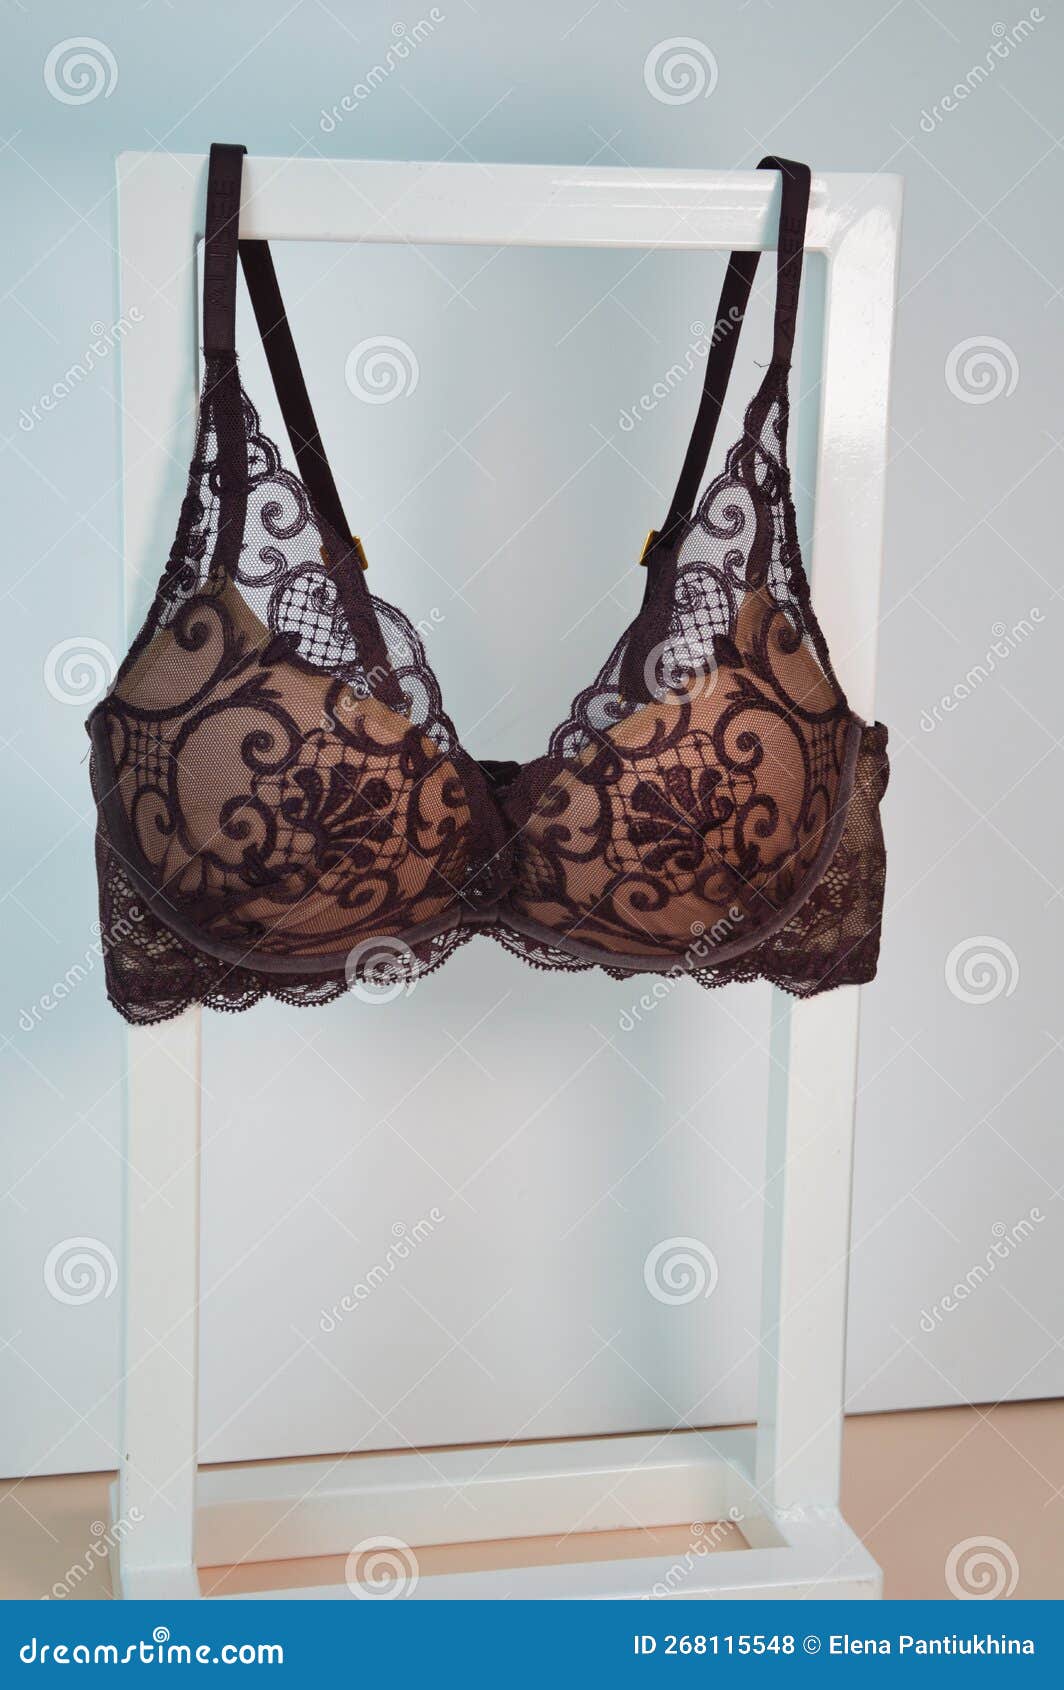 https://thumbs.dreamstime.com/z/dark-plum-women-s-push-up-bra-one-lace-hangs-stand-close-white-background-sexy-underwear-lacy-purple-beige-color-fashion-268115548.jpg